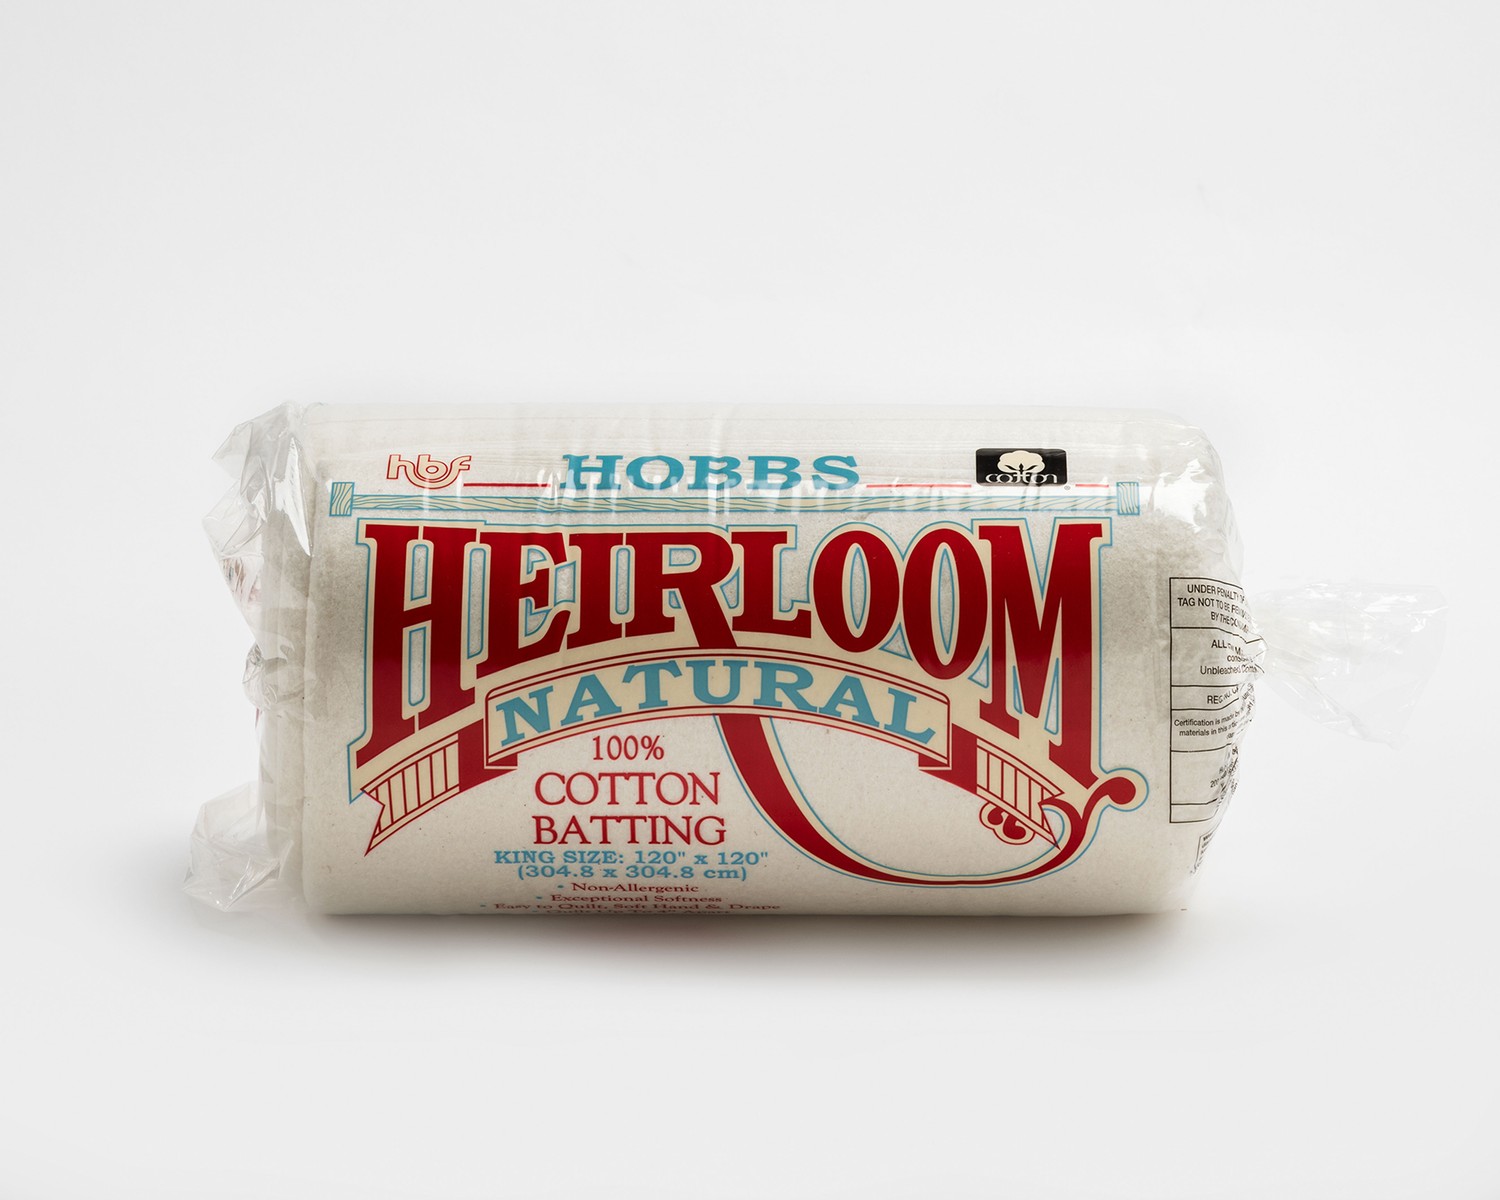 Heirloom cottons – Behind the Hill